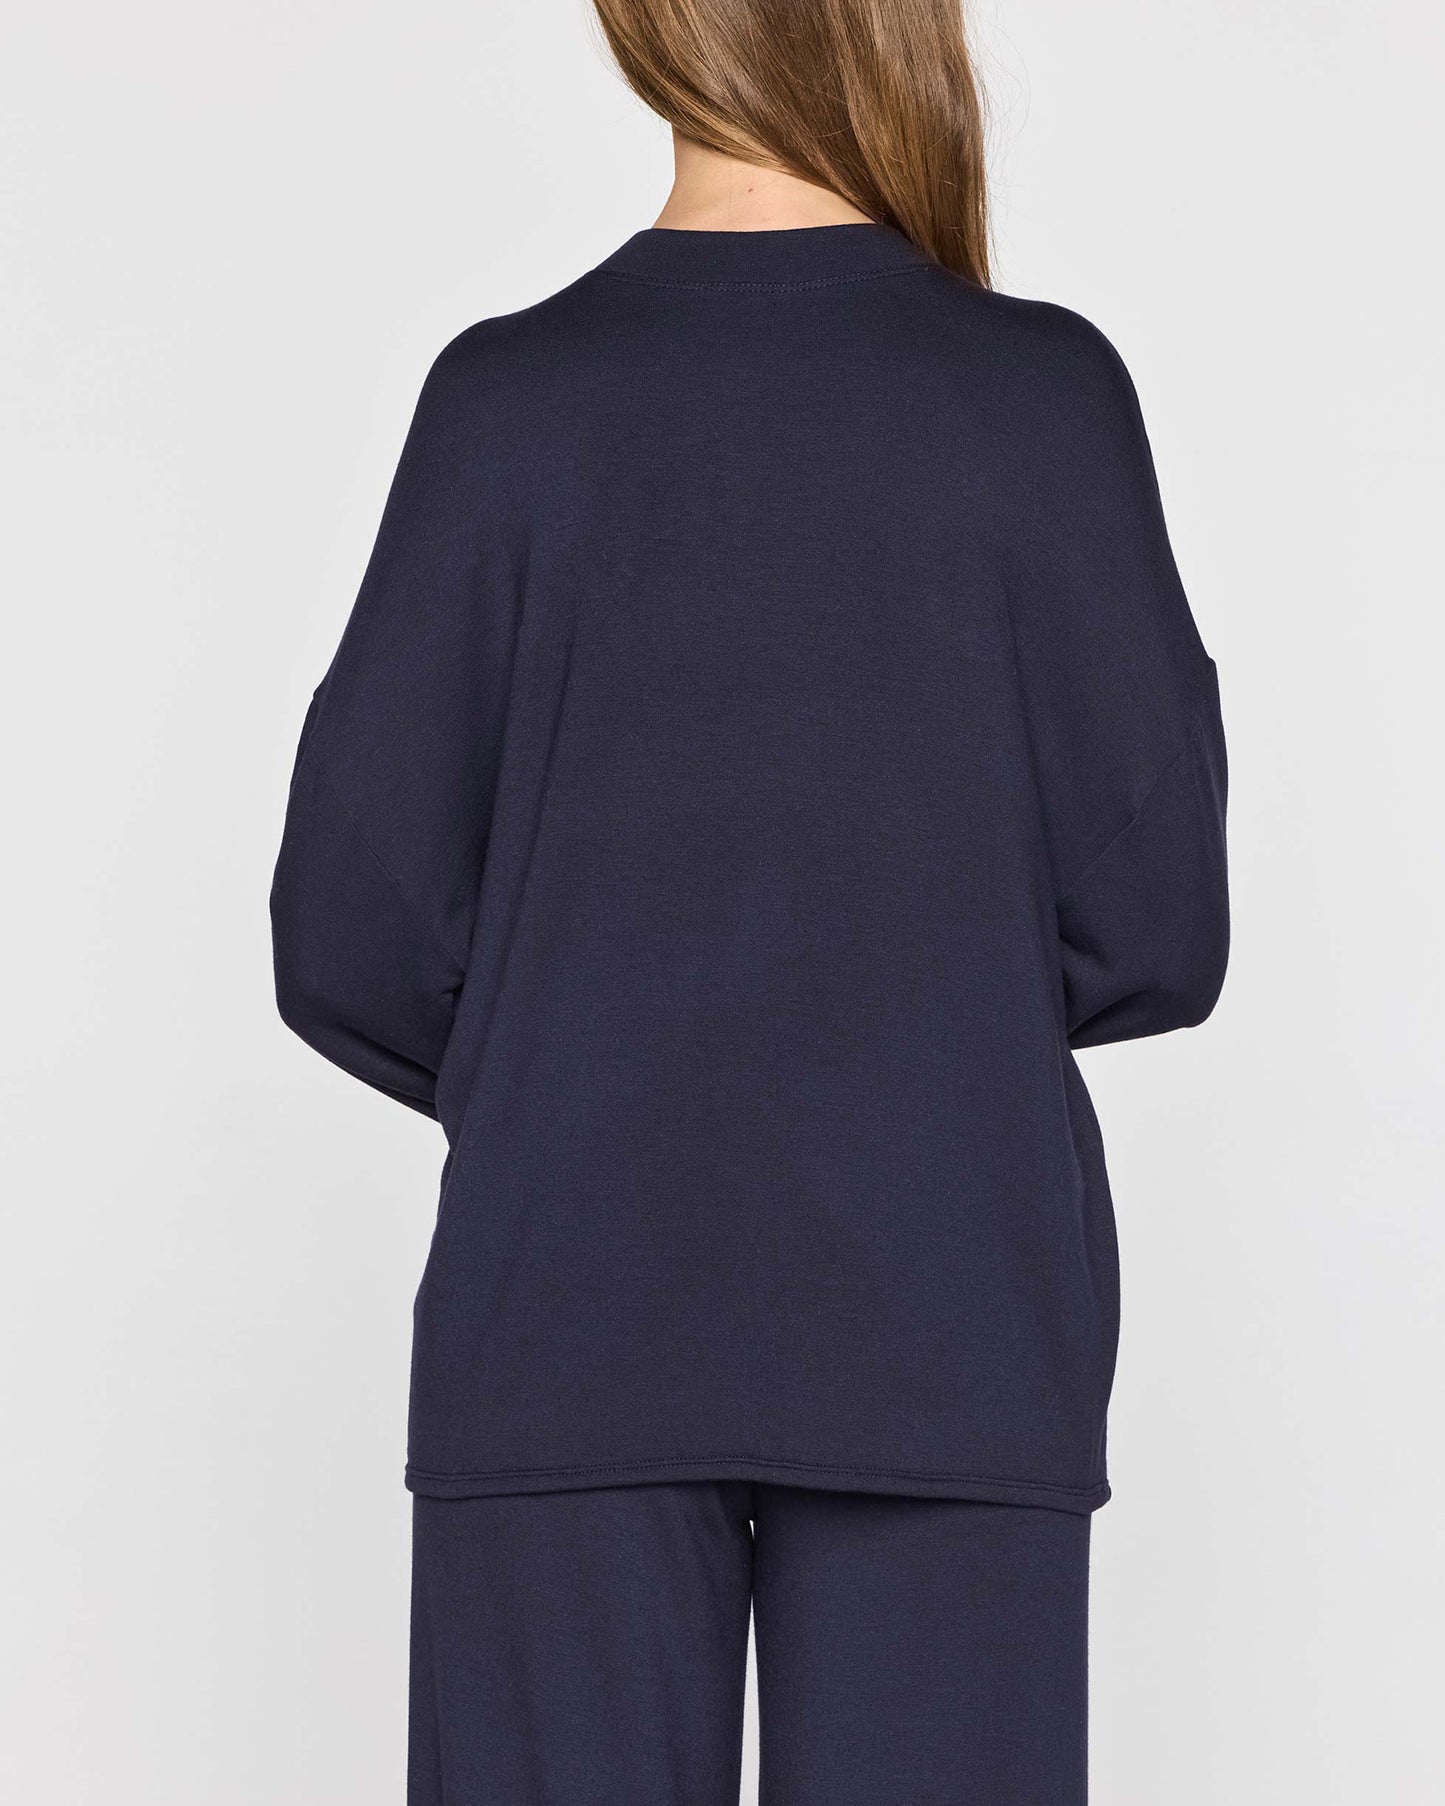 Navy | The Bell Sleeve Crew Back